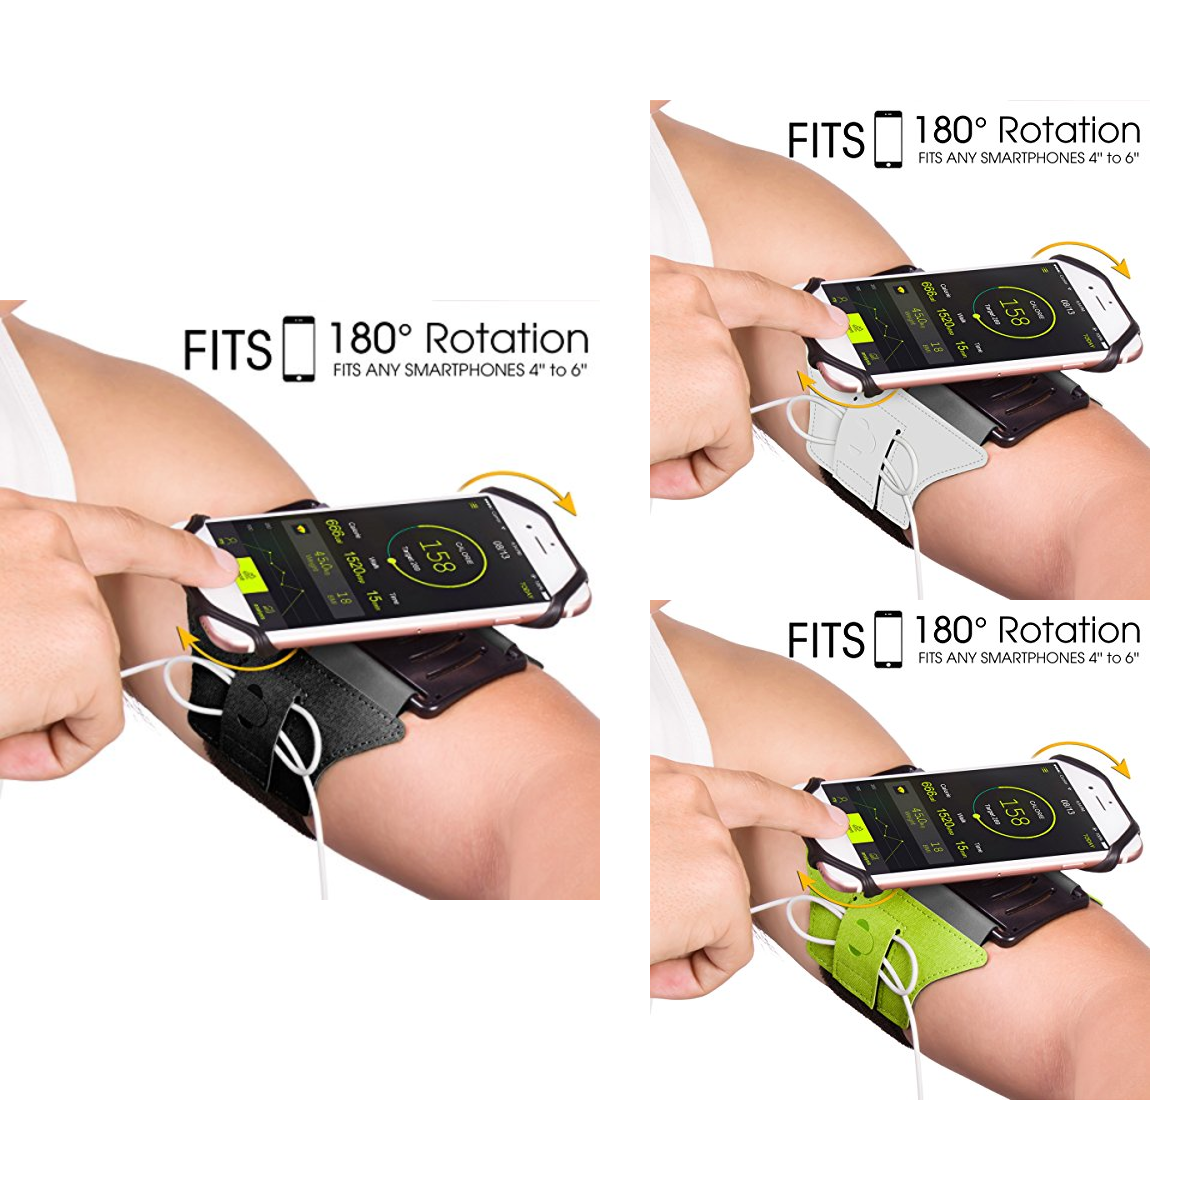 Universal Running Armband for all types of phones 180° Rotatable with Key Holder - Everyday Crosstrain